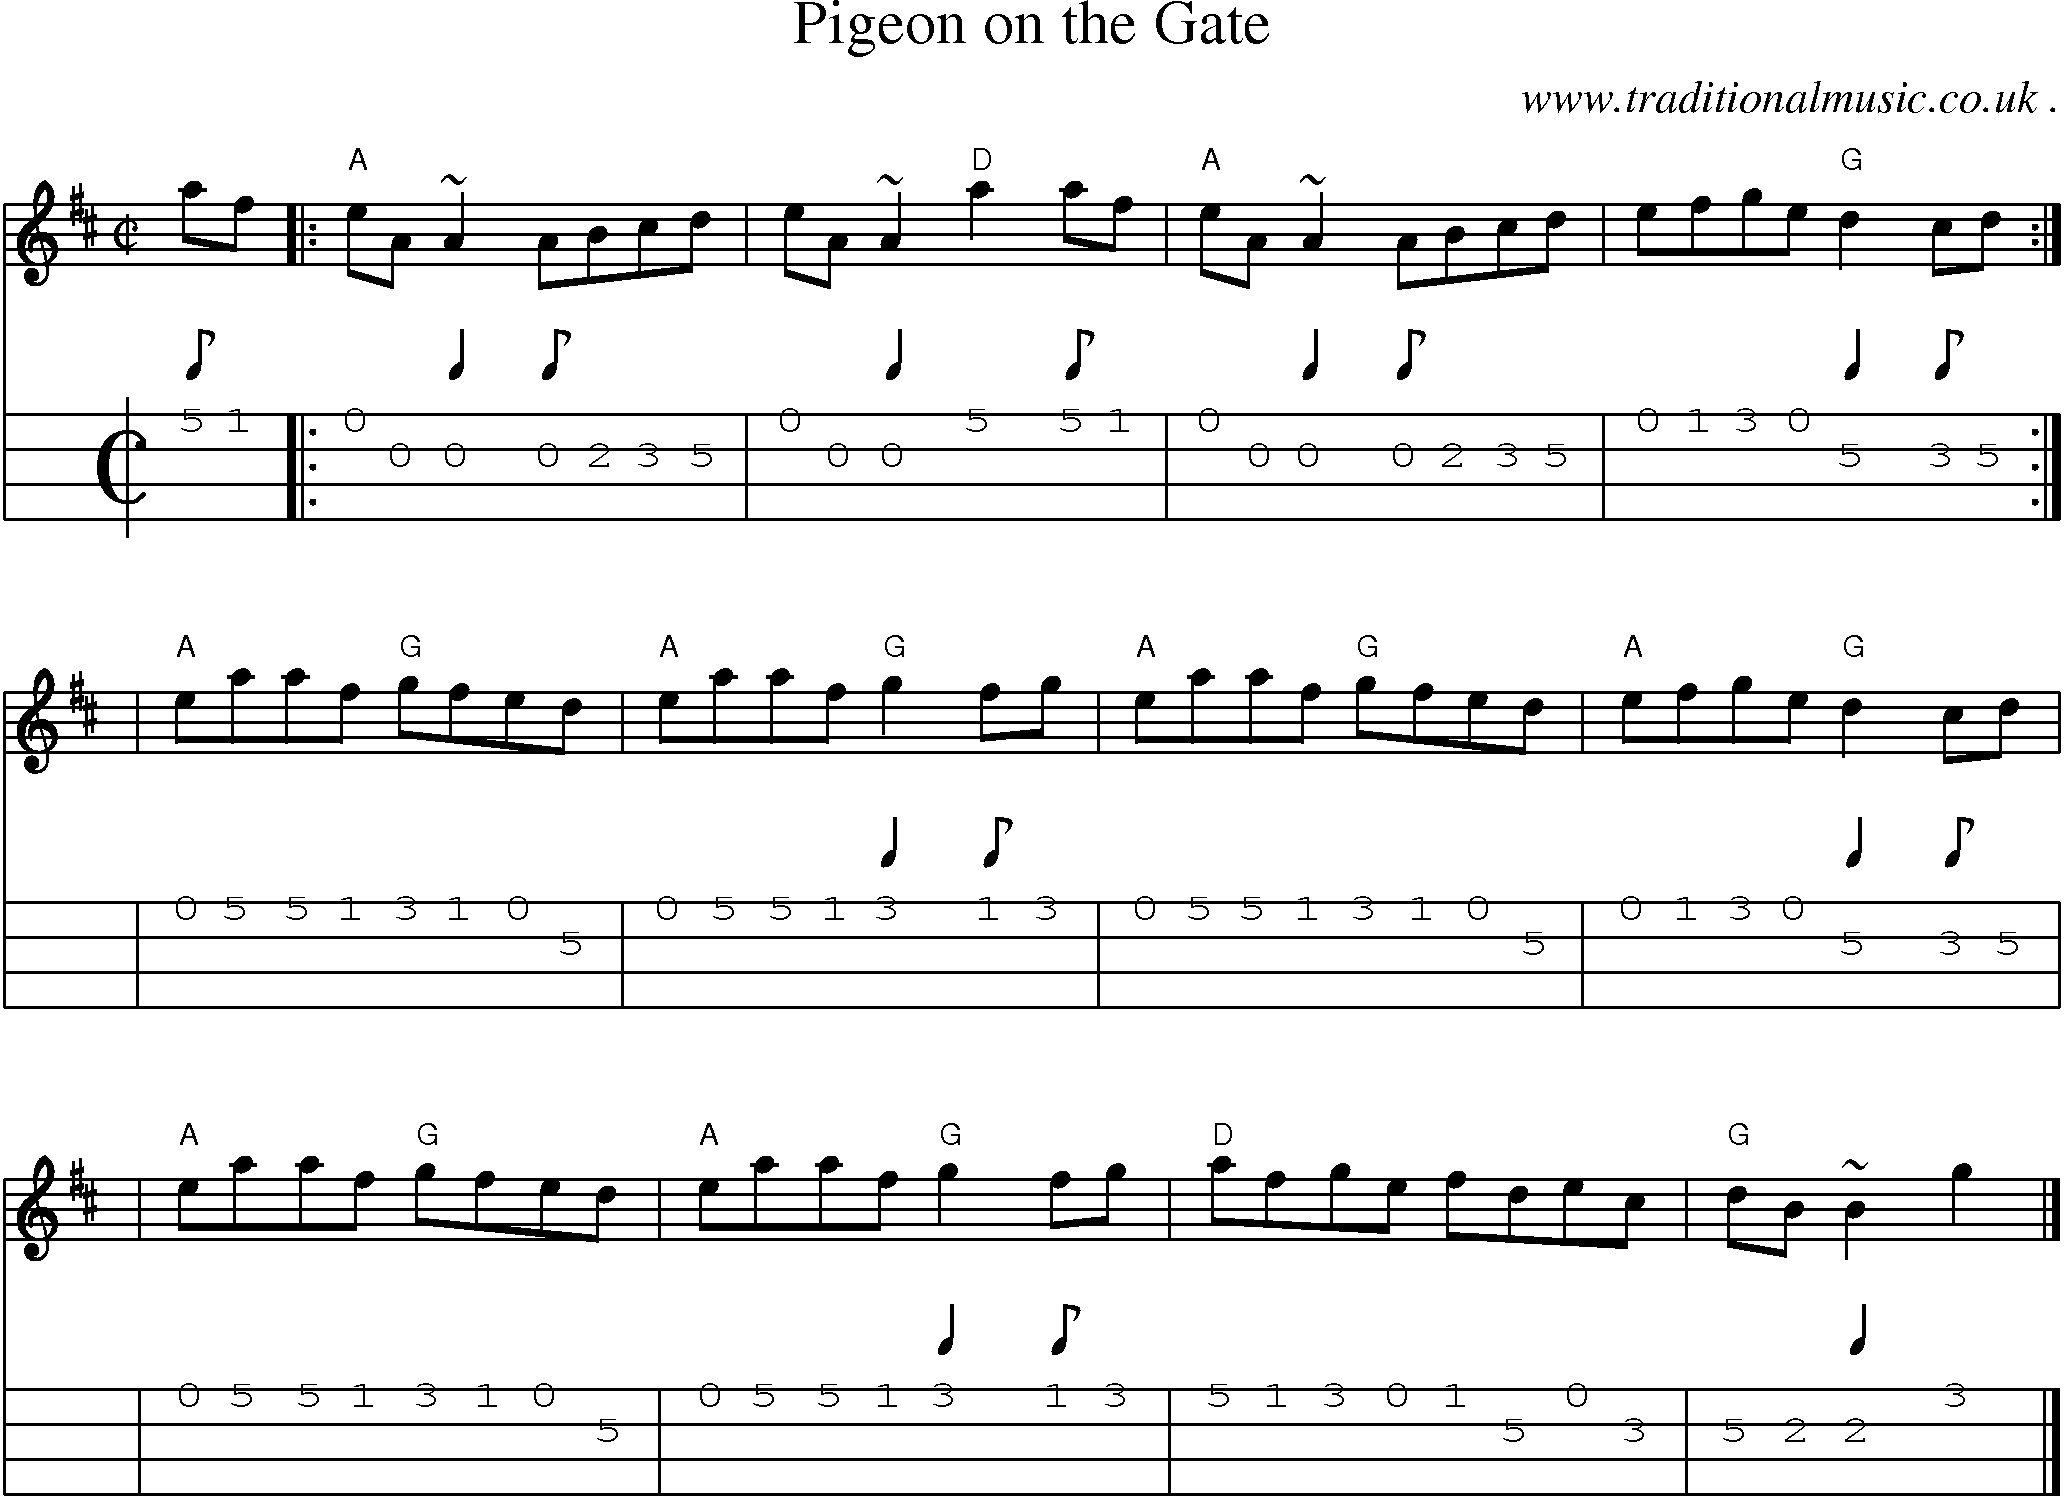 Sheet-music  score, Chords and Mandolin Tabs for Pigeon On The Gate